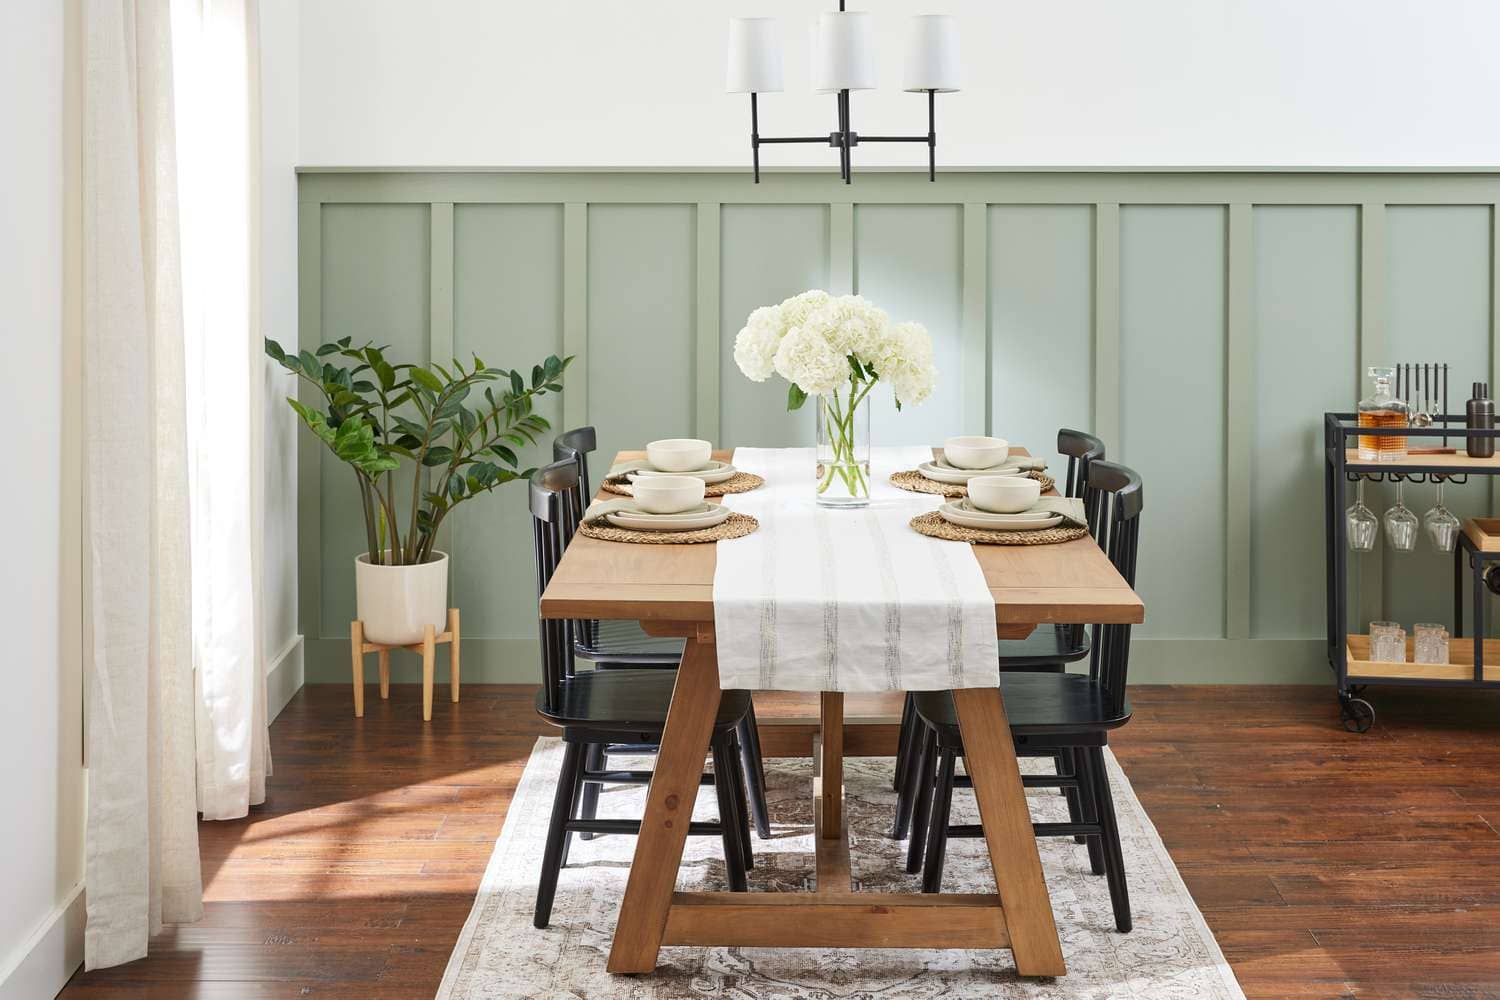 Modern Wainscoting: Elevate Your Interior Design with Style